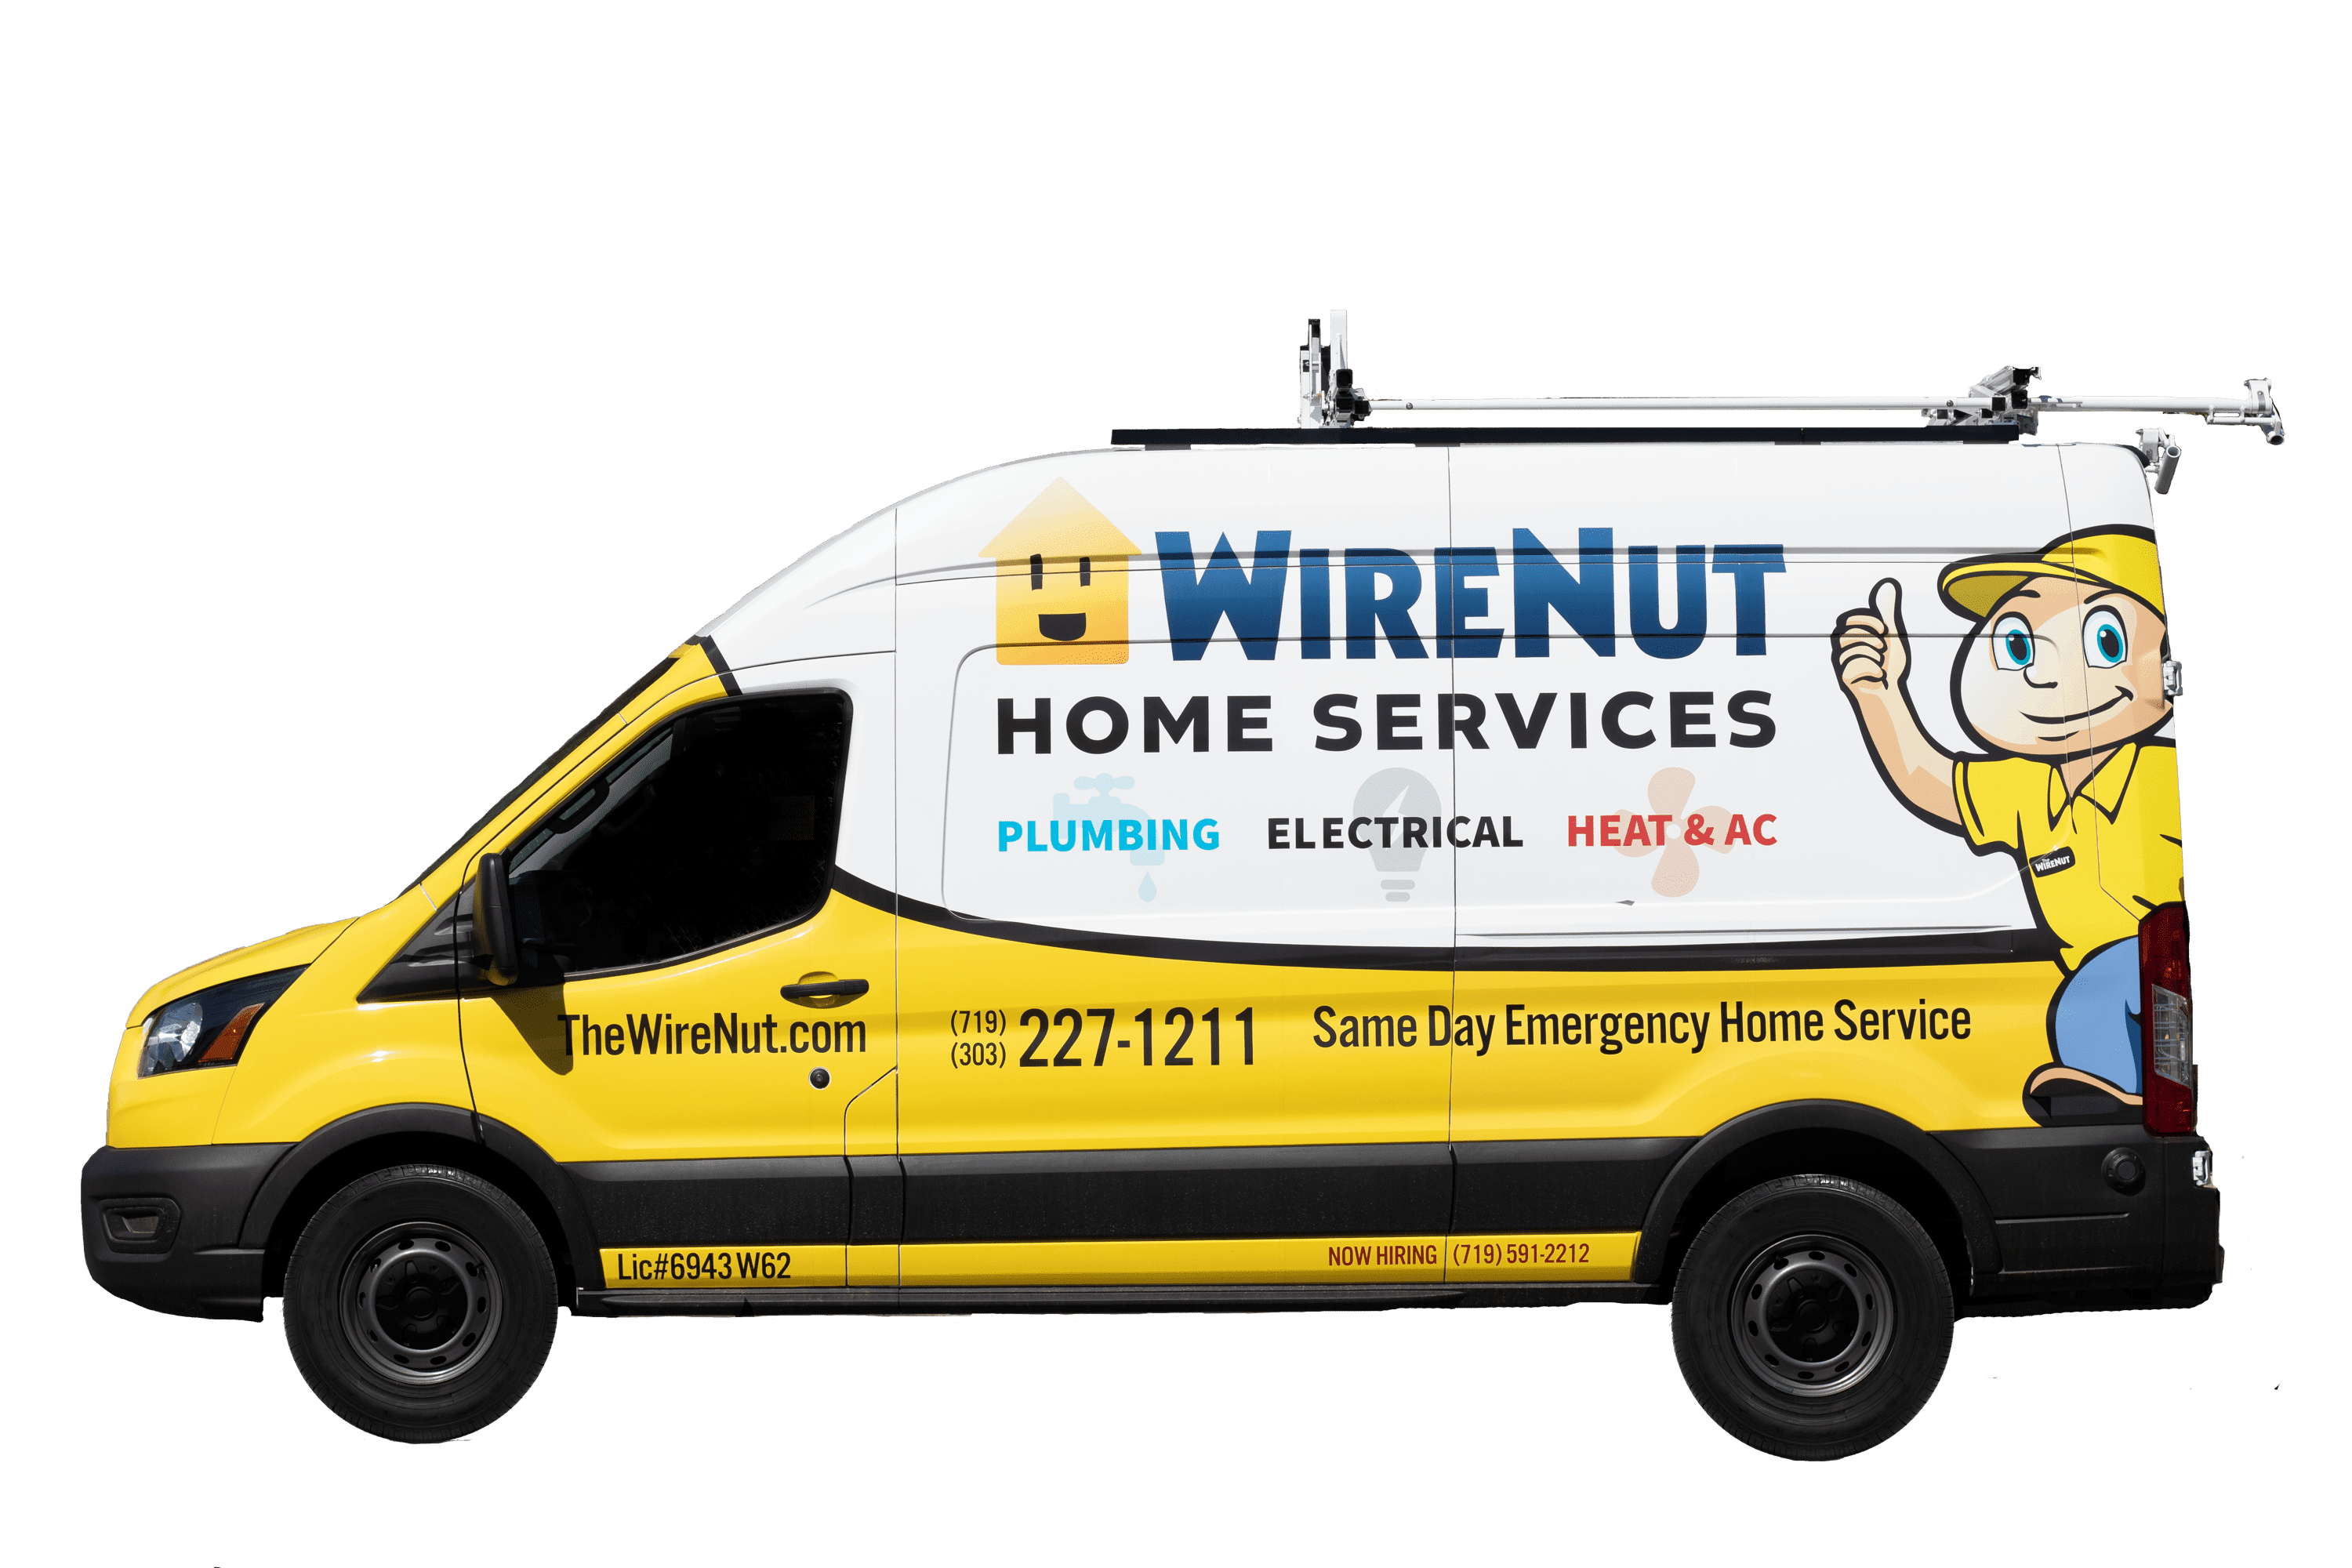 Sewer Main Line Services in Colorado Springs, CO | WireNut Home Services